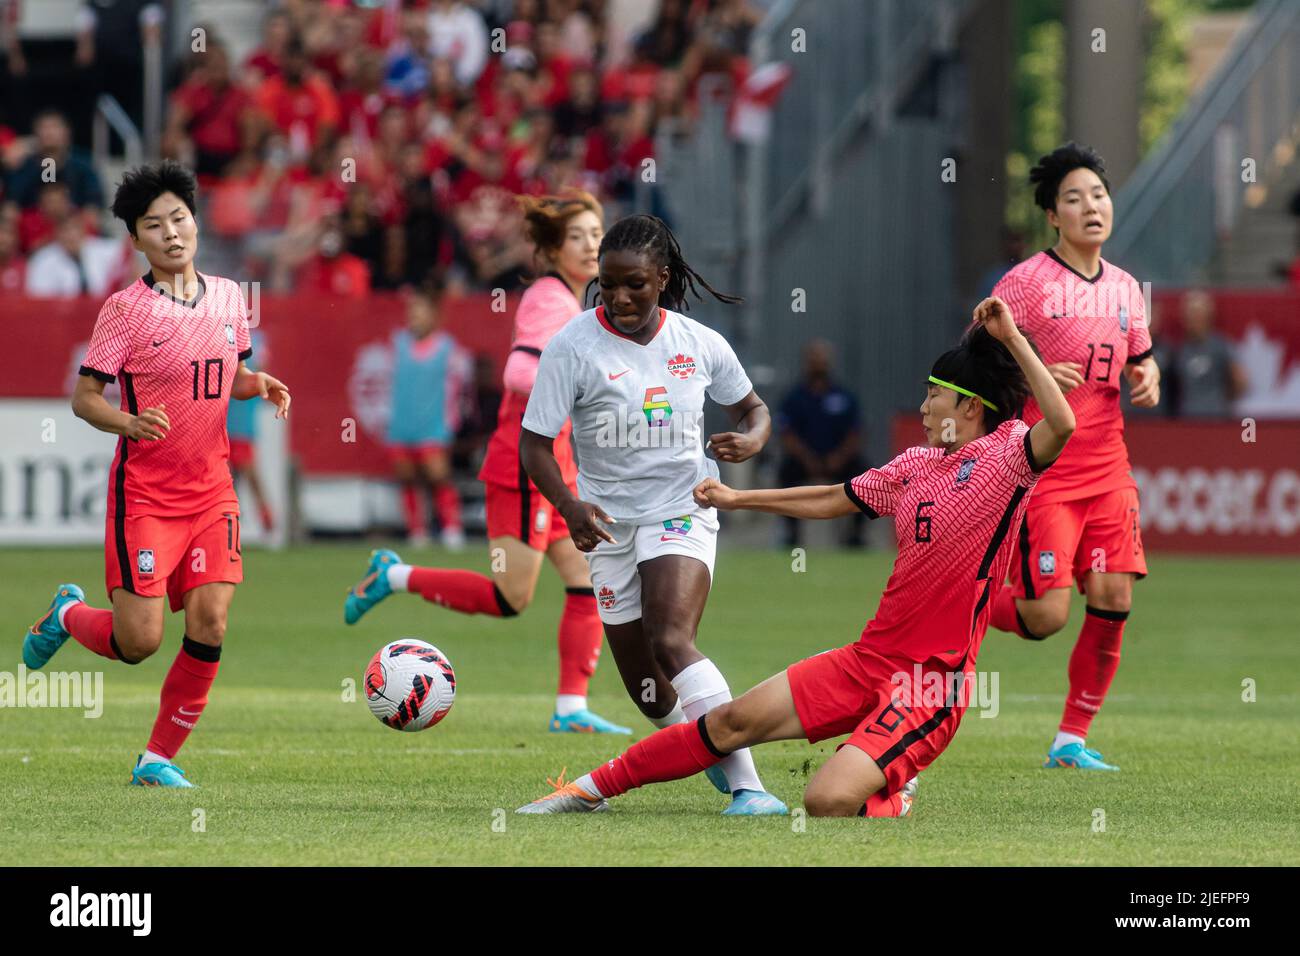 Toronto, Canada, June 26, 2022: Deanne Rose (No. 6, white) of Team Canada competes for the ball against Lim Seon-Joo (No. 6, red) during the International Friendly Match at BMO Field in Toronto, Canada. Canada and Korea draw 0-0. Credit: Phamai Techaphan/Alamy Live News Stock Photo